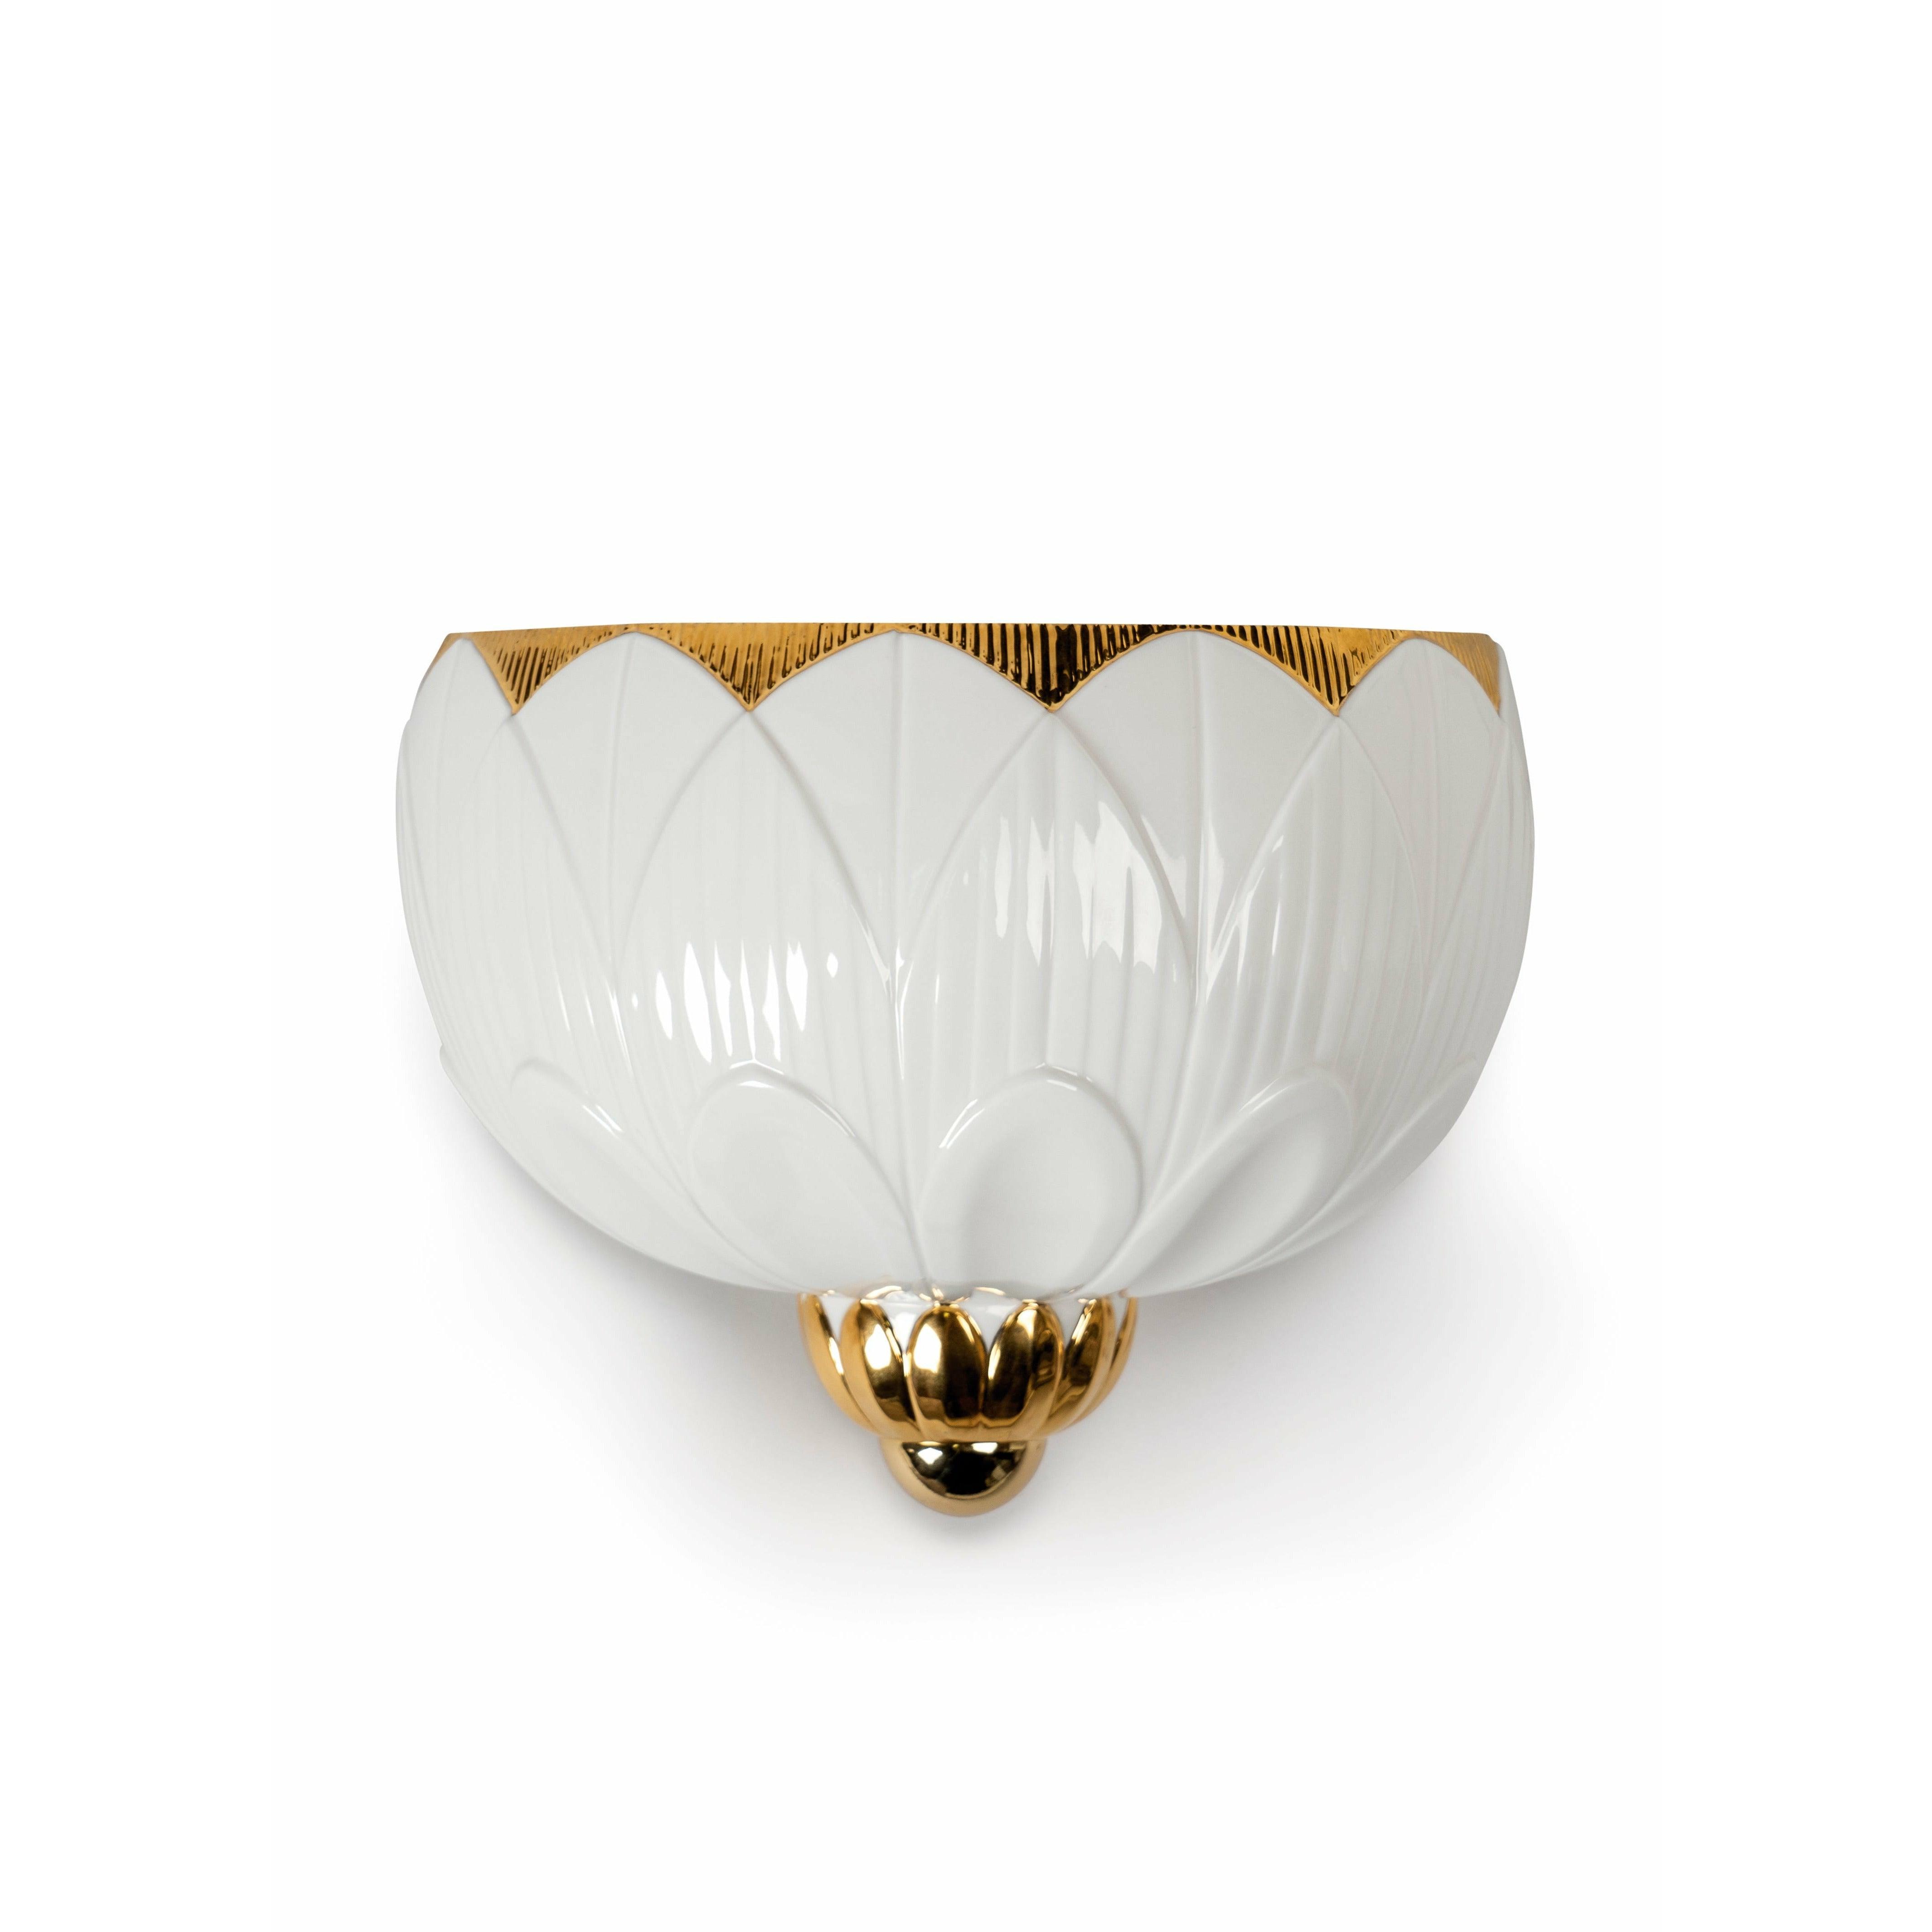 Lladro - Ivy & Seed Wall Sconce - 01023993 | Montreal Lighting & Hardware